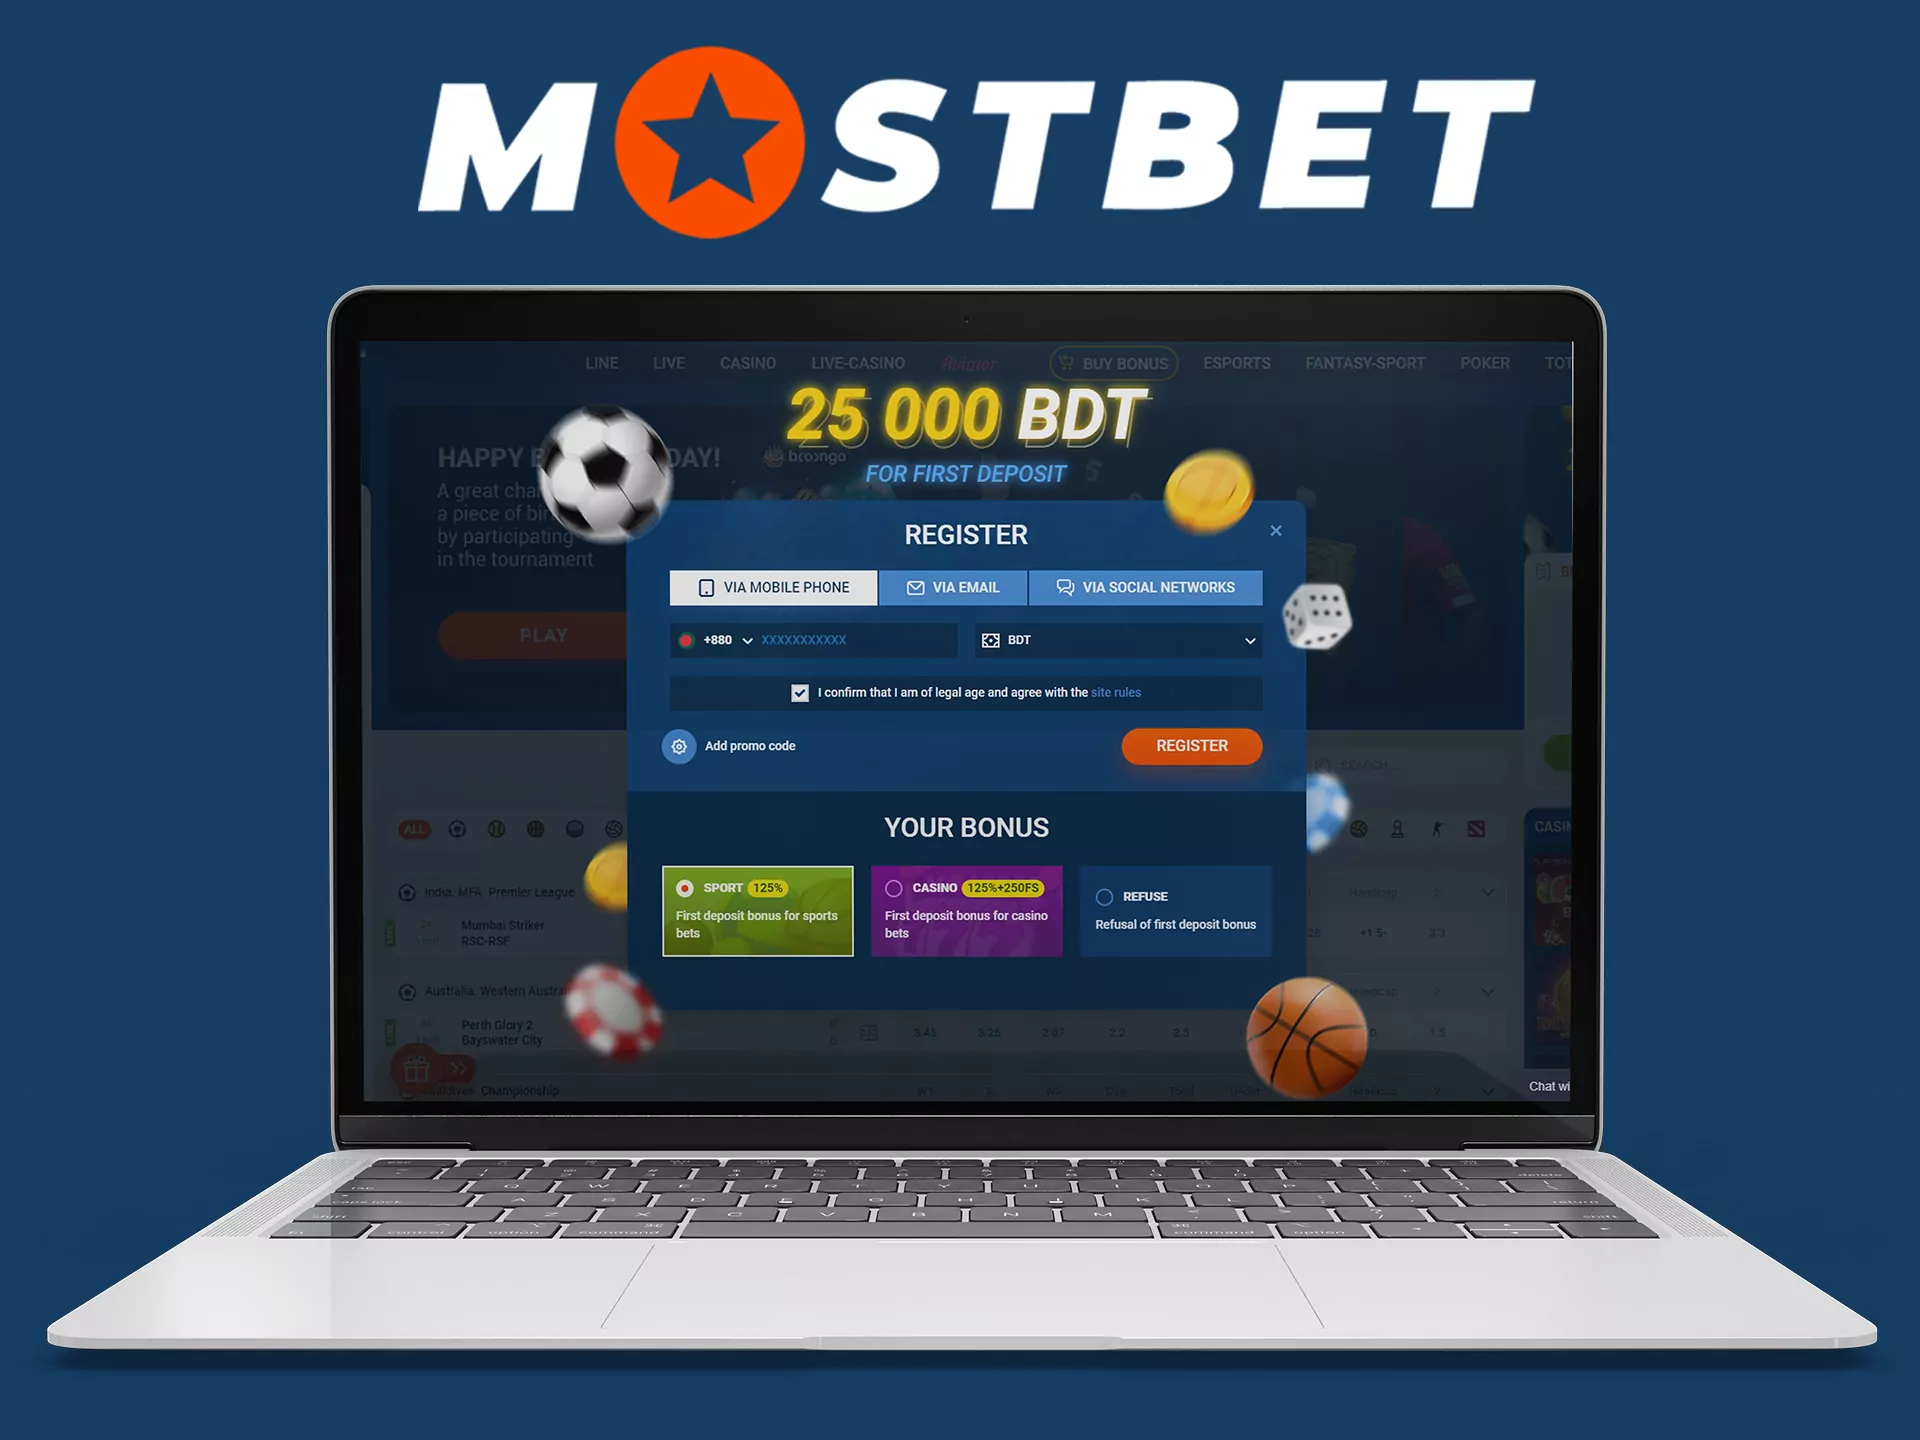 You can register in one click at Mostbet.